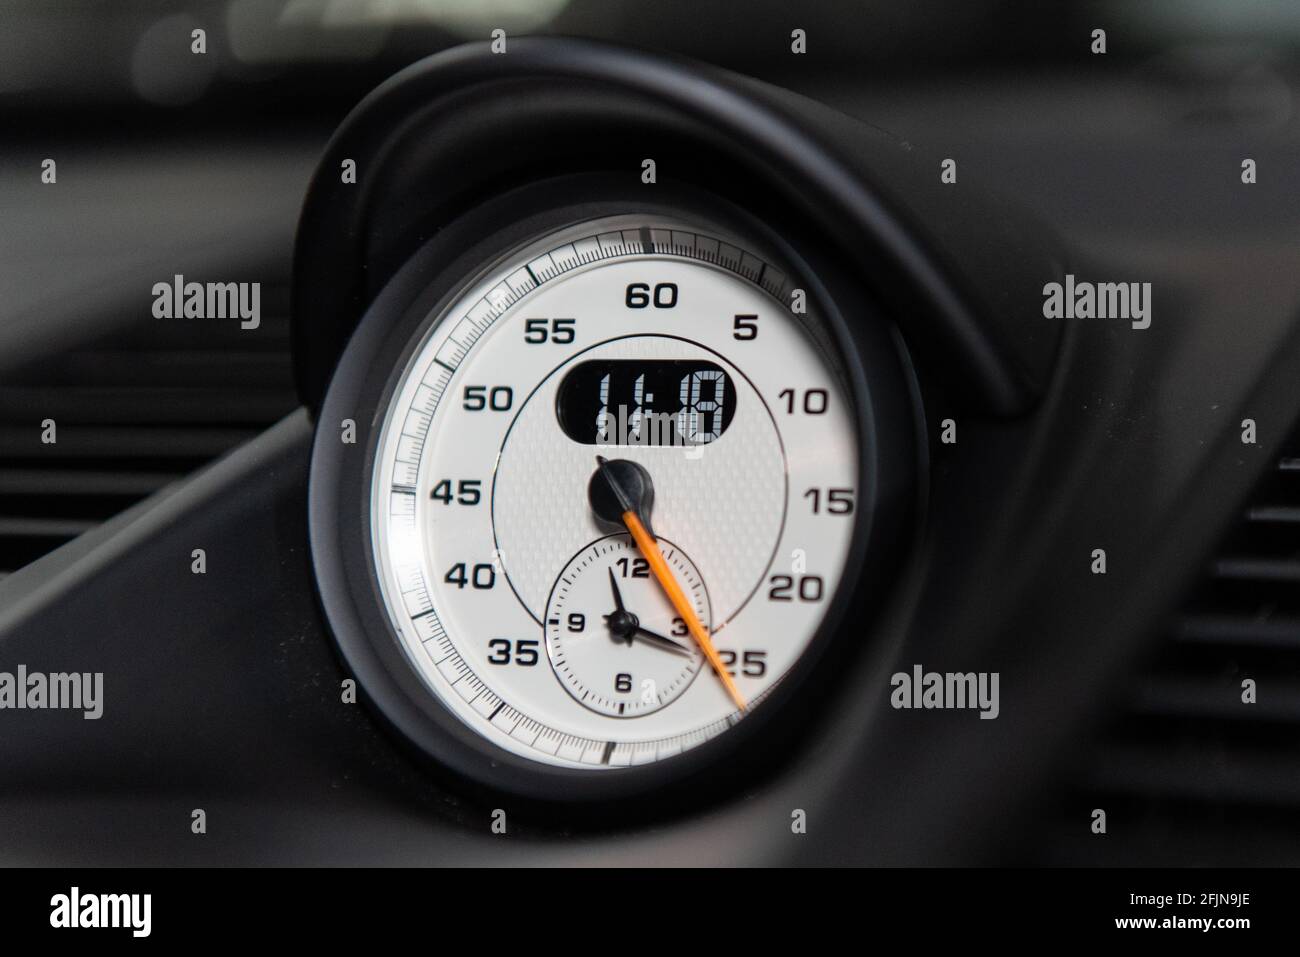 Dashboard guage gives an accurate readout of minutes and hours in analog or digital clock face. Stock Photo